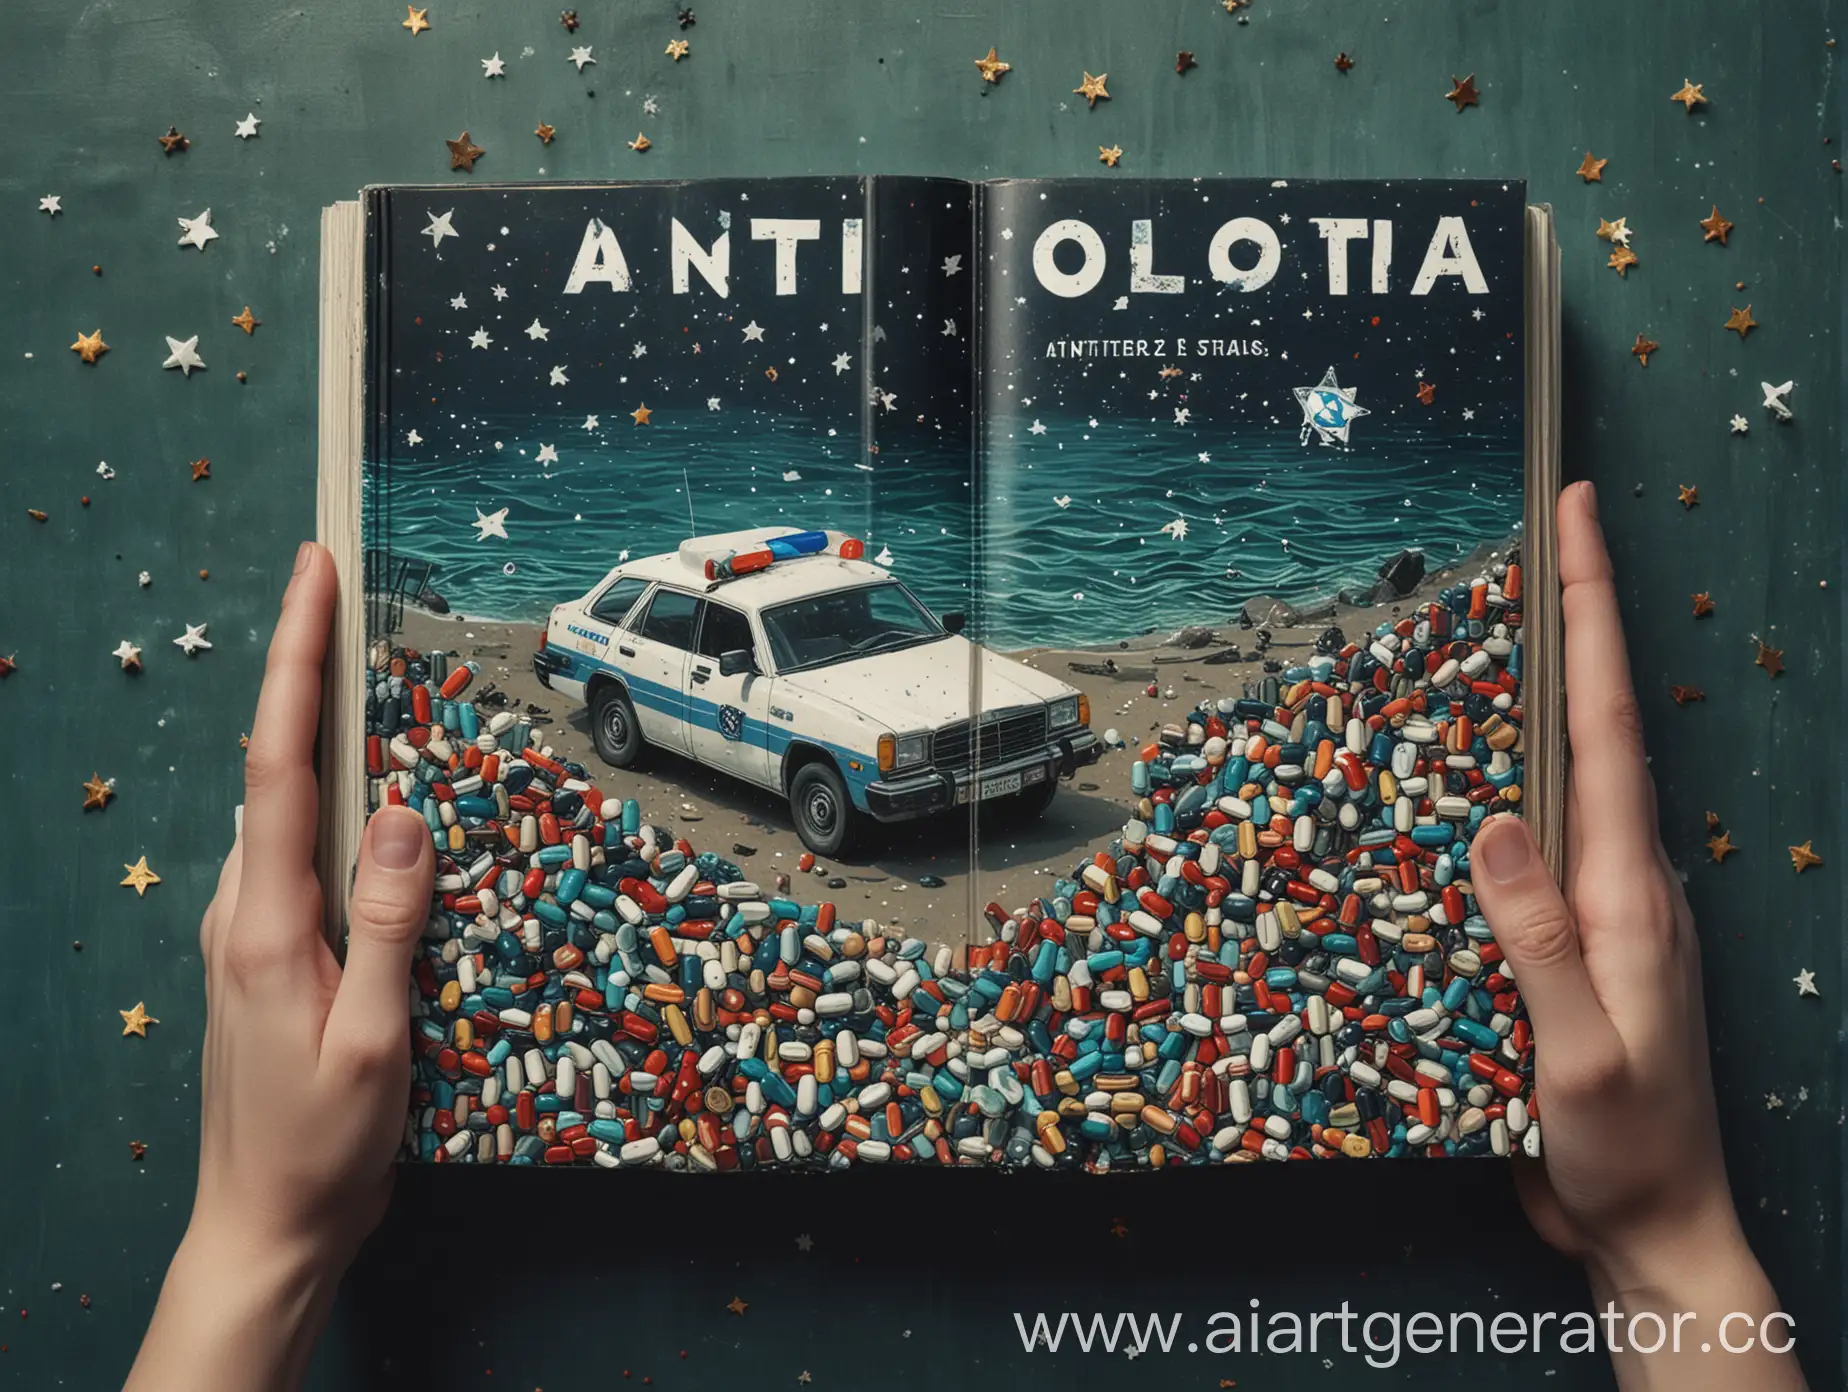 Dystopian-Book-Cover-Hands-Holding-Pills-Under-a-Starry-Sky-with-Police-Car-Overlooking-the-Sea